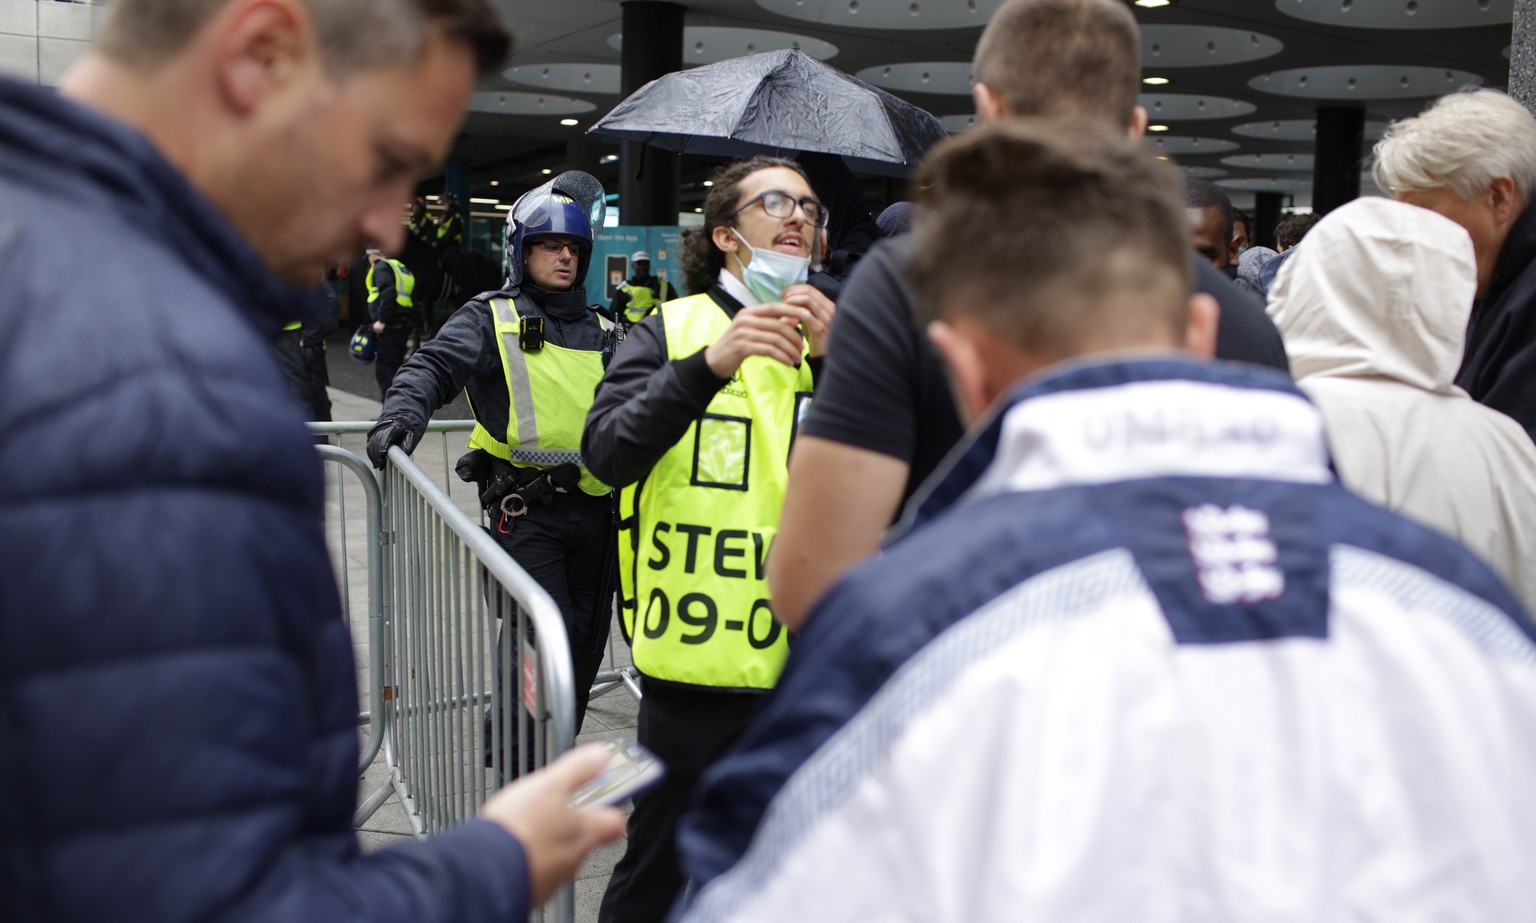 Stewards check for electronic tickets of fans as they enter Wembley Stadium in London, Sunday, July 11, 2021, prior to the Euro 2020 soccer championship final match between England and Italy. (AP Phot ...